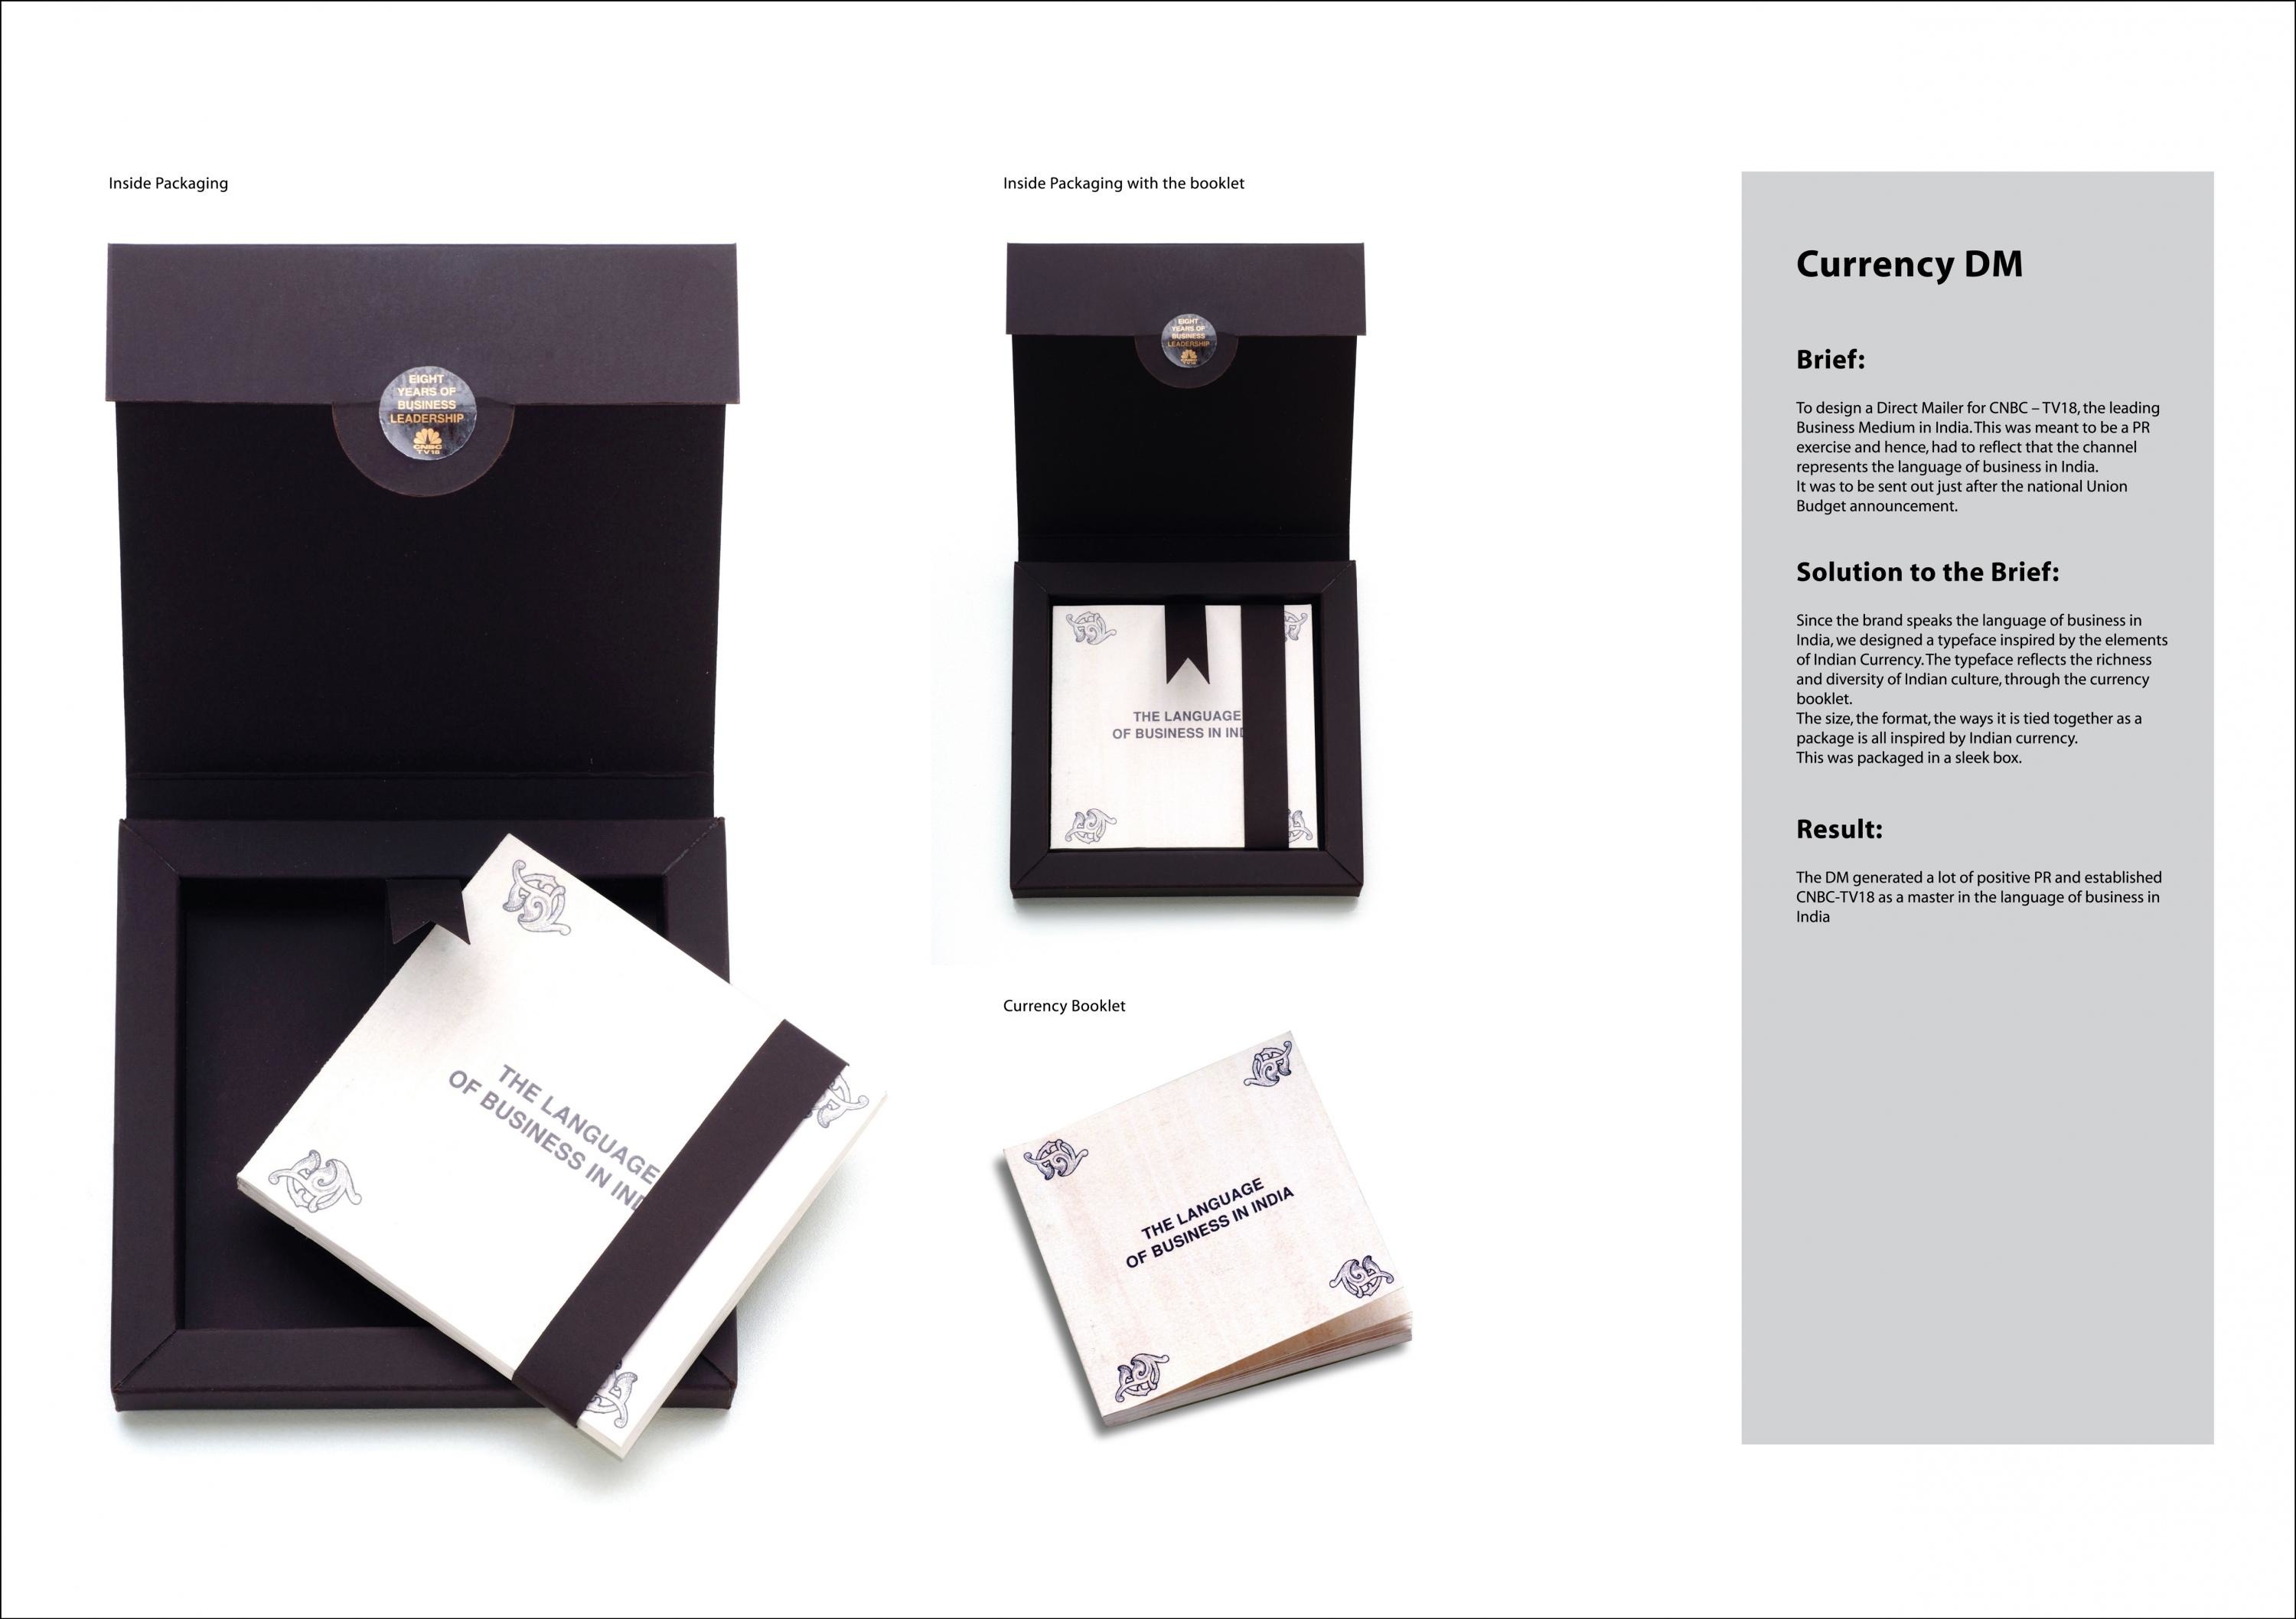 CORPORATE INFORMATION DIRECT MAIL